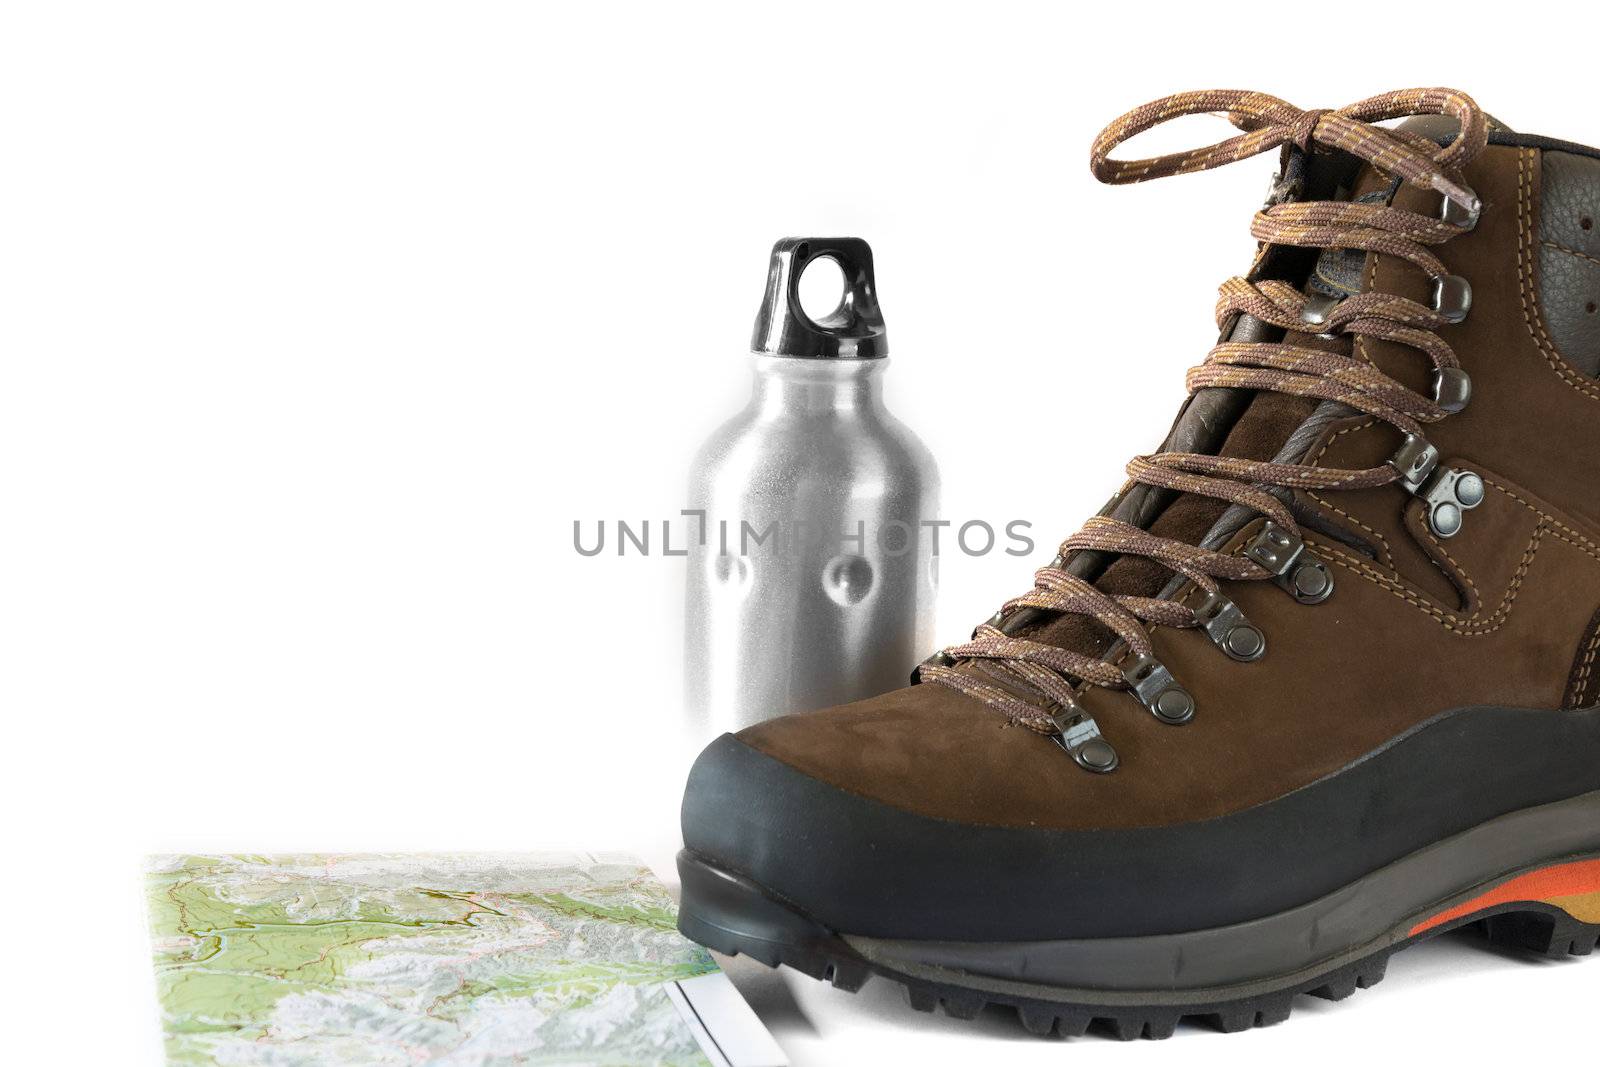 hiking boot with a water bottle and a topographic map by enrico.lapponi